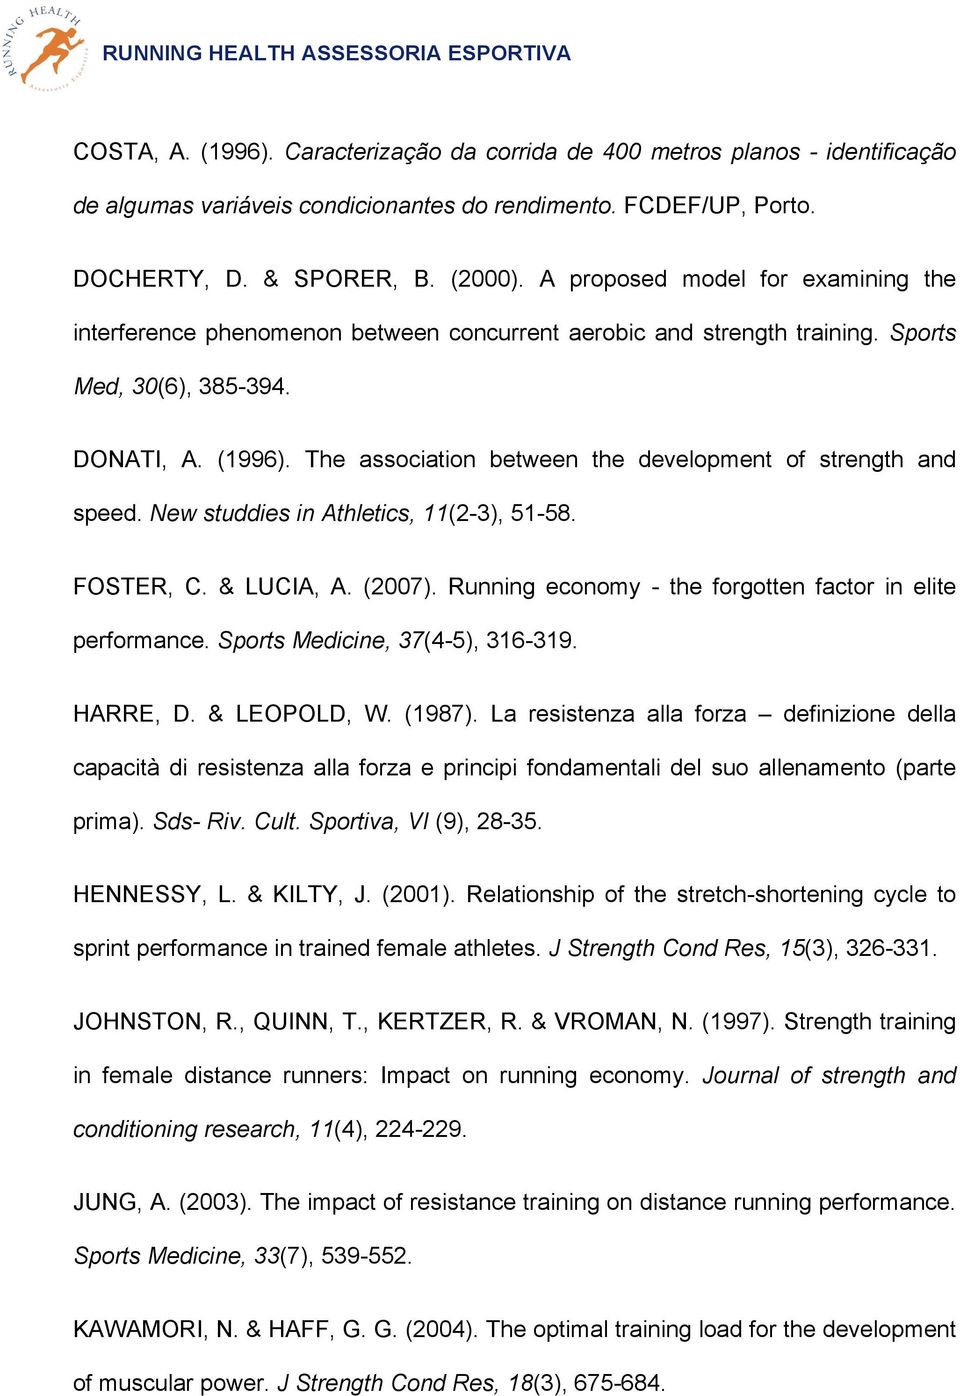 The association between the development of strength and speed. New studdies in Athletics, 11(2-3), 51-58. FOSTER, C. & LUCIA, A. (2007). Running economy - the forgotten factor in elite performance.